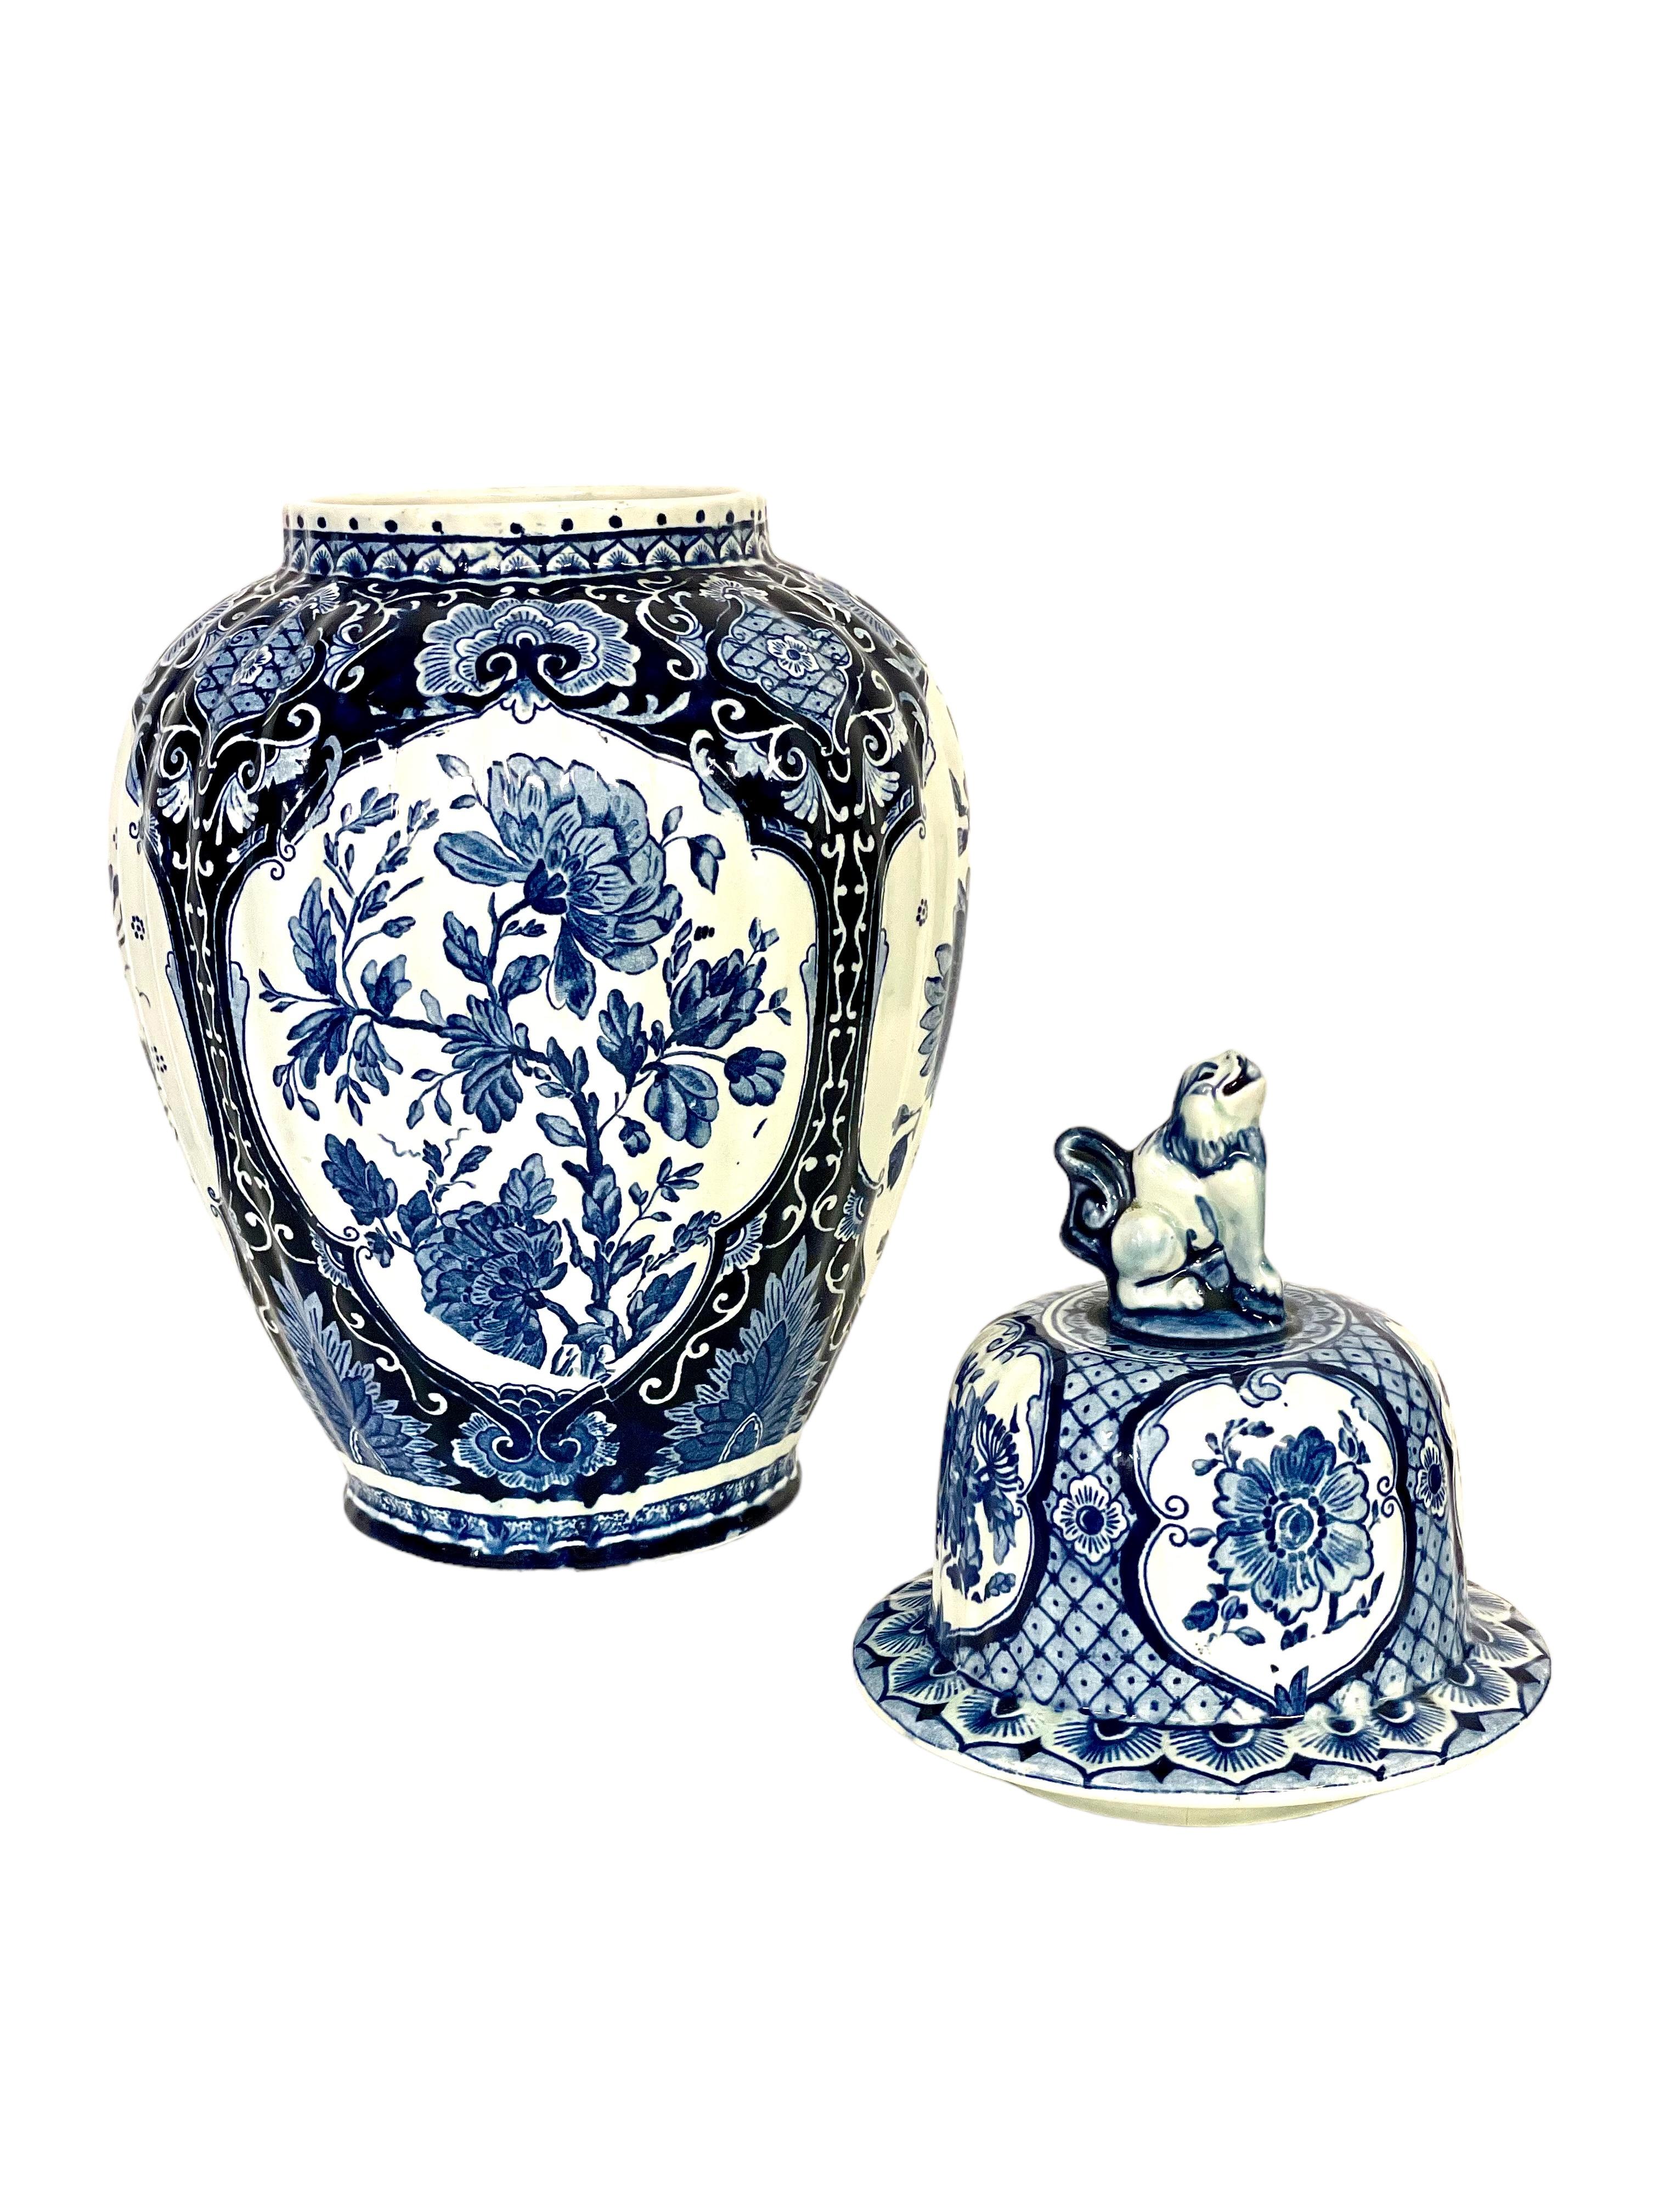 A large and handsome Delft lidded baluster vase, in the traditional blue and white colour scheme of this Dutch pottery producer. The vase dates from the second half of the 20th century, and bears the maker's mark of Boch for Royal Sphinx in